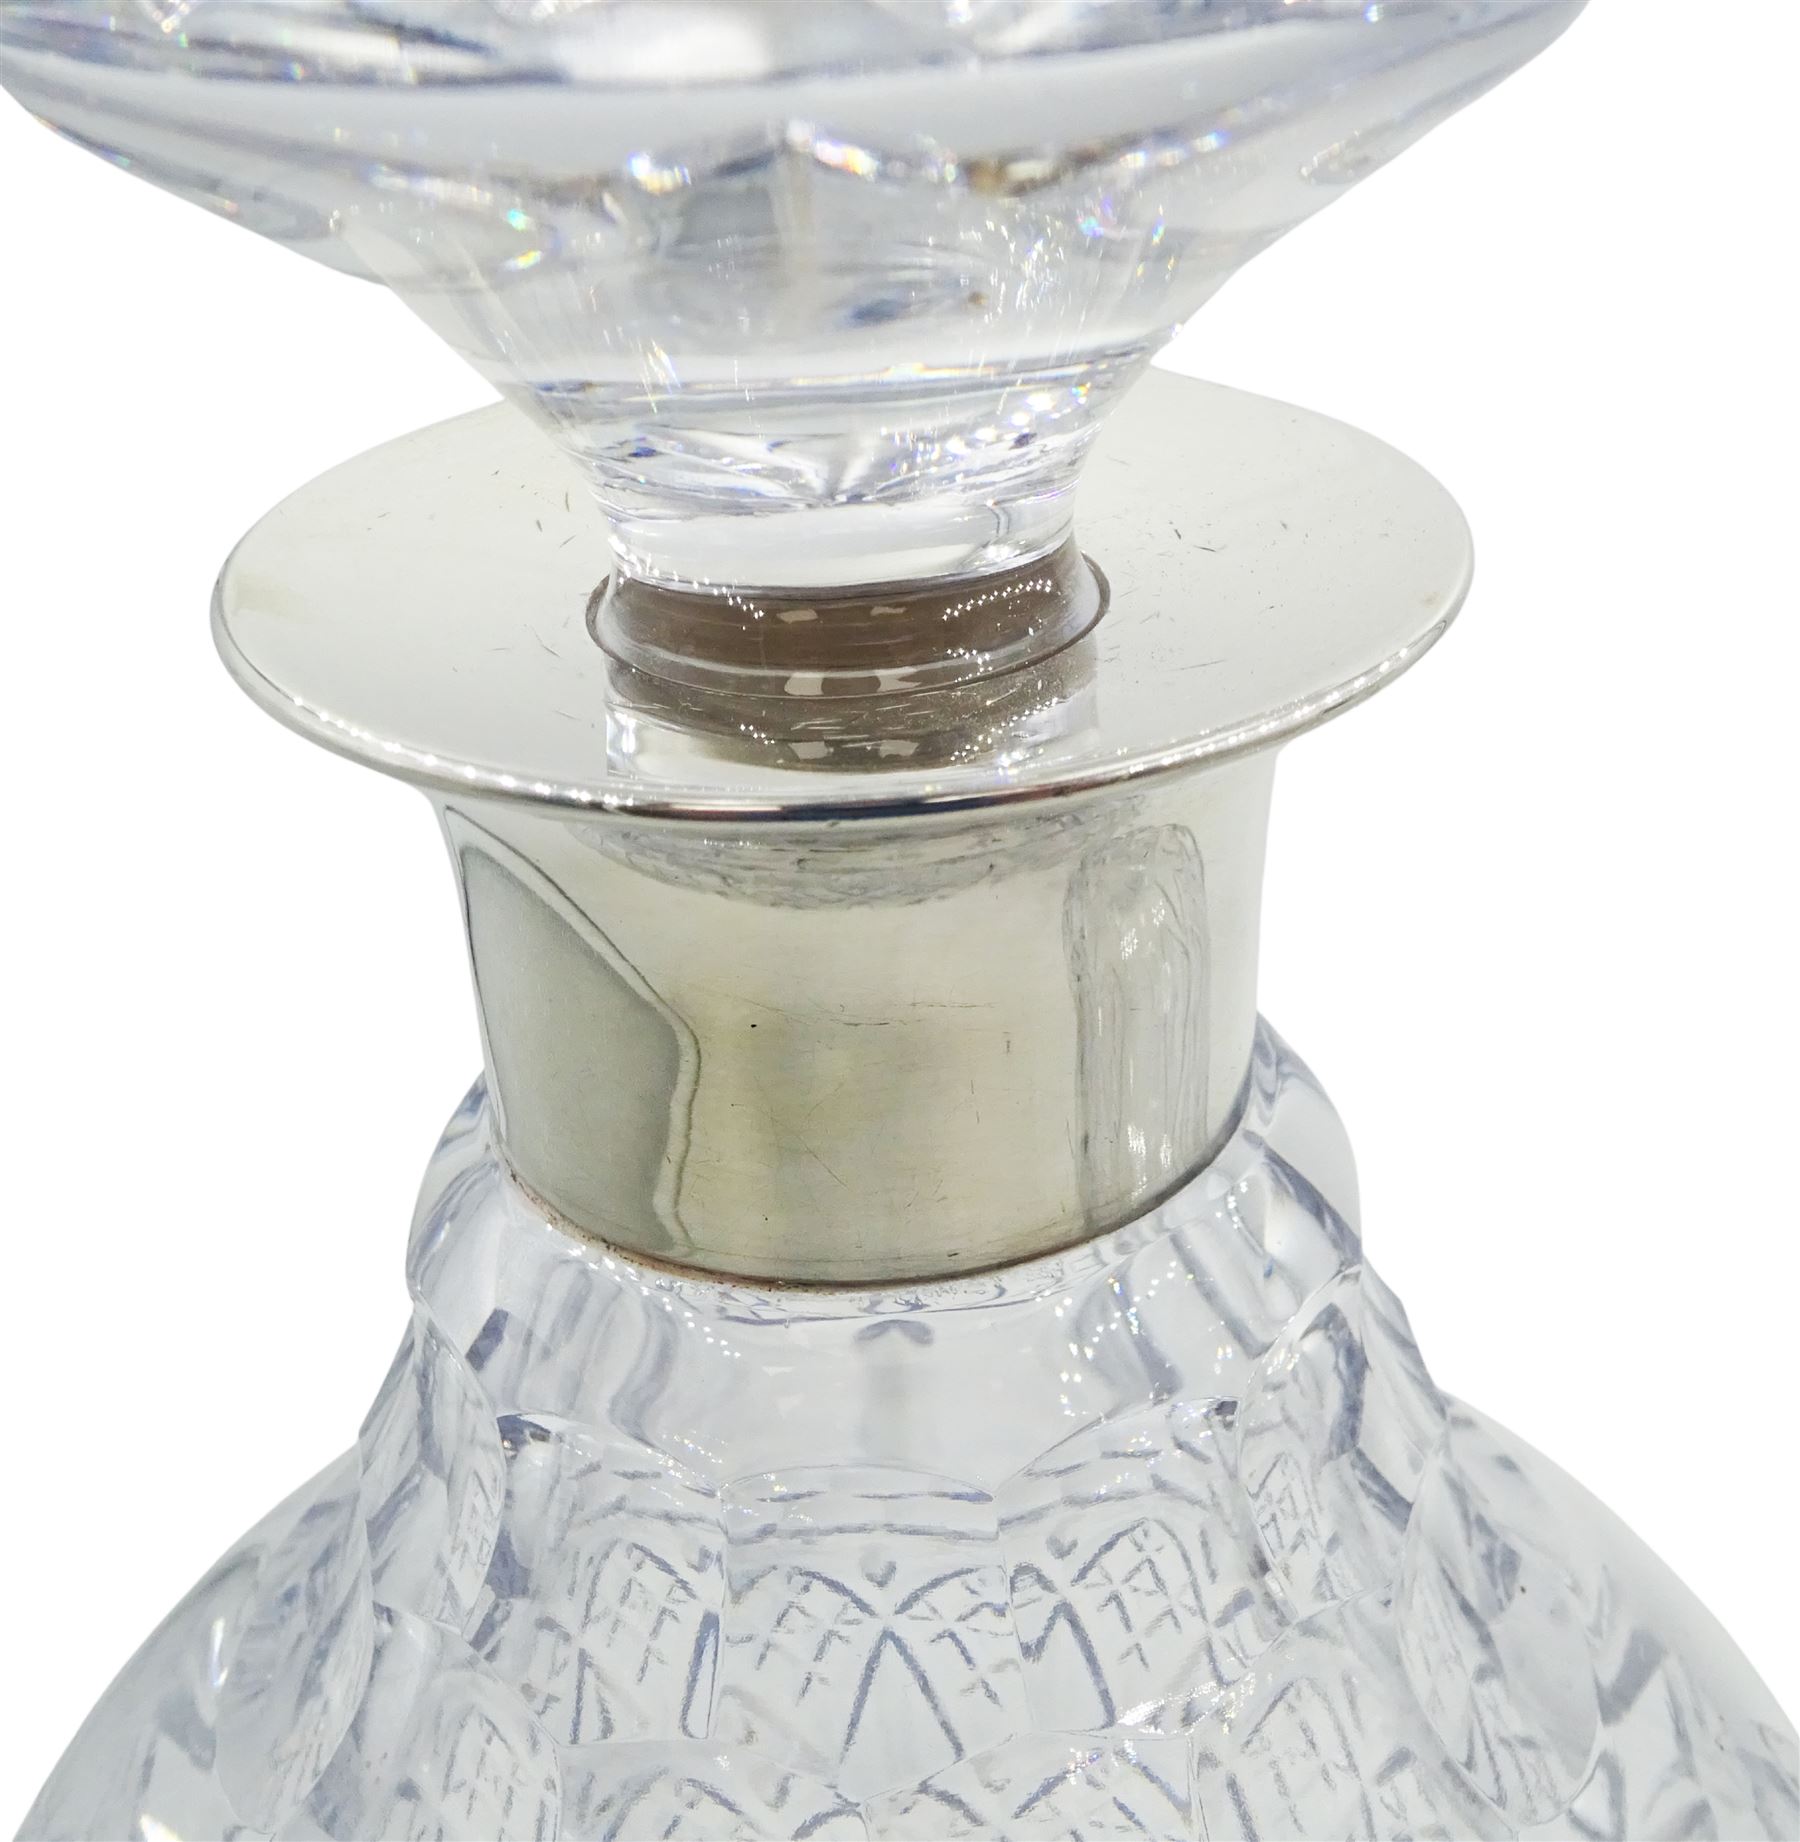 Pair of modern silver mounted Royal Doulton cut glass decanters - Image 3 of 3